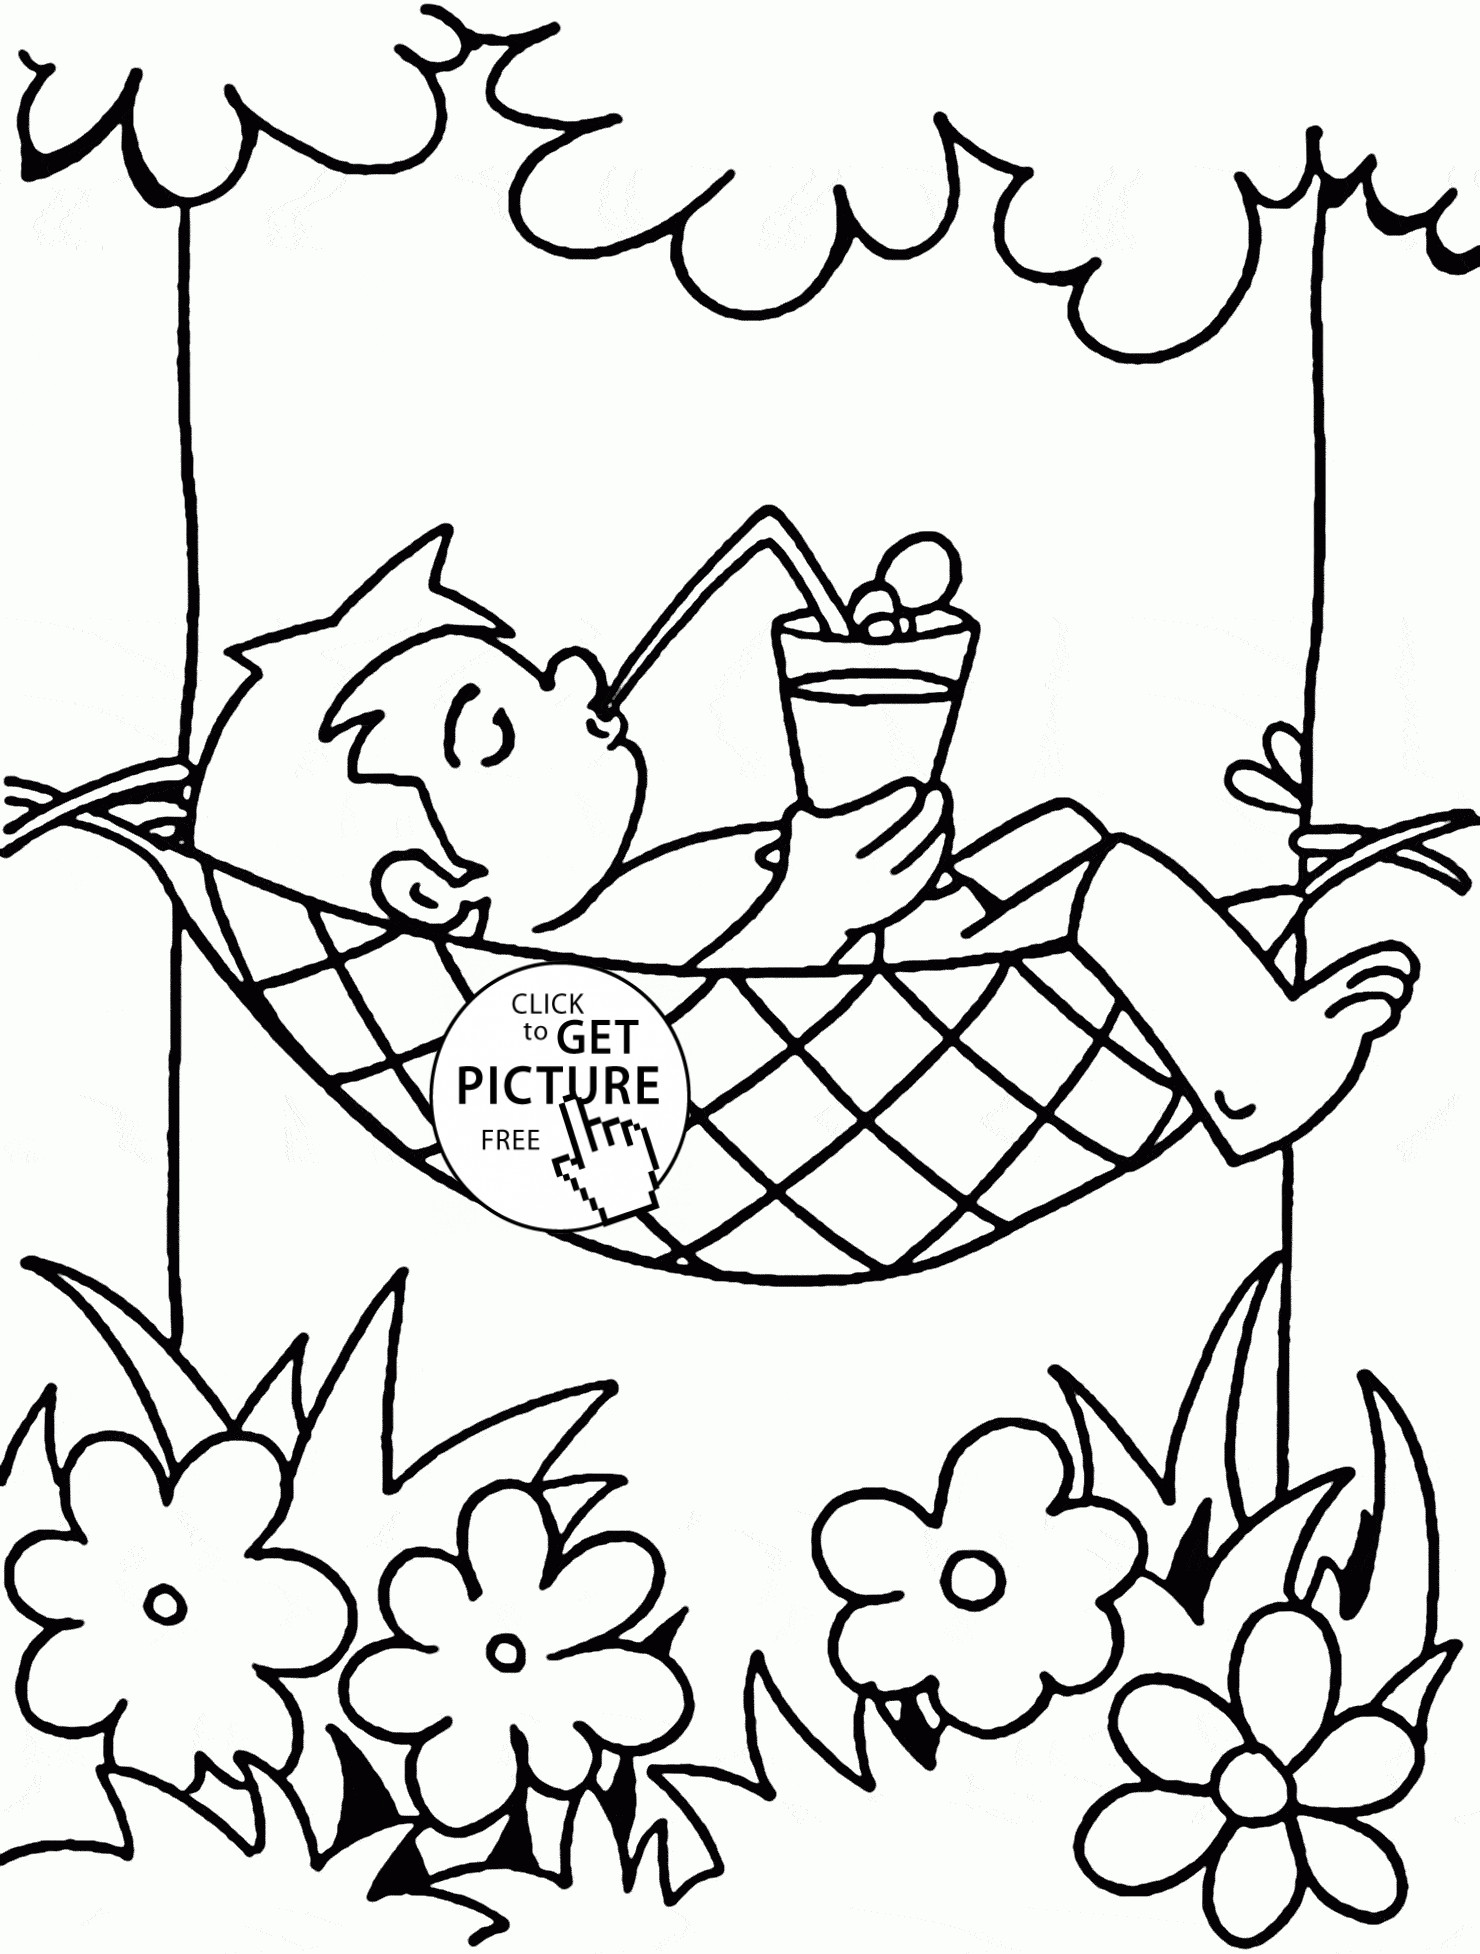 Summer Coloring Pages For Kids
 Vacation in Summertime coloring page for kids seasons